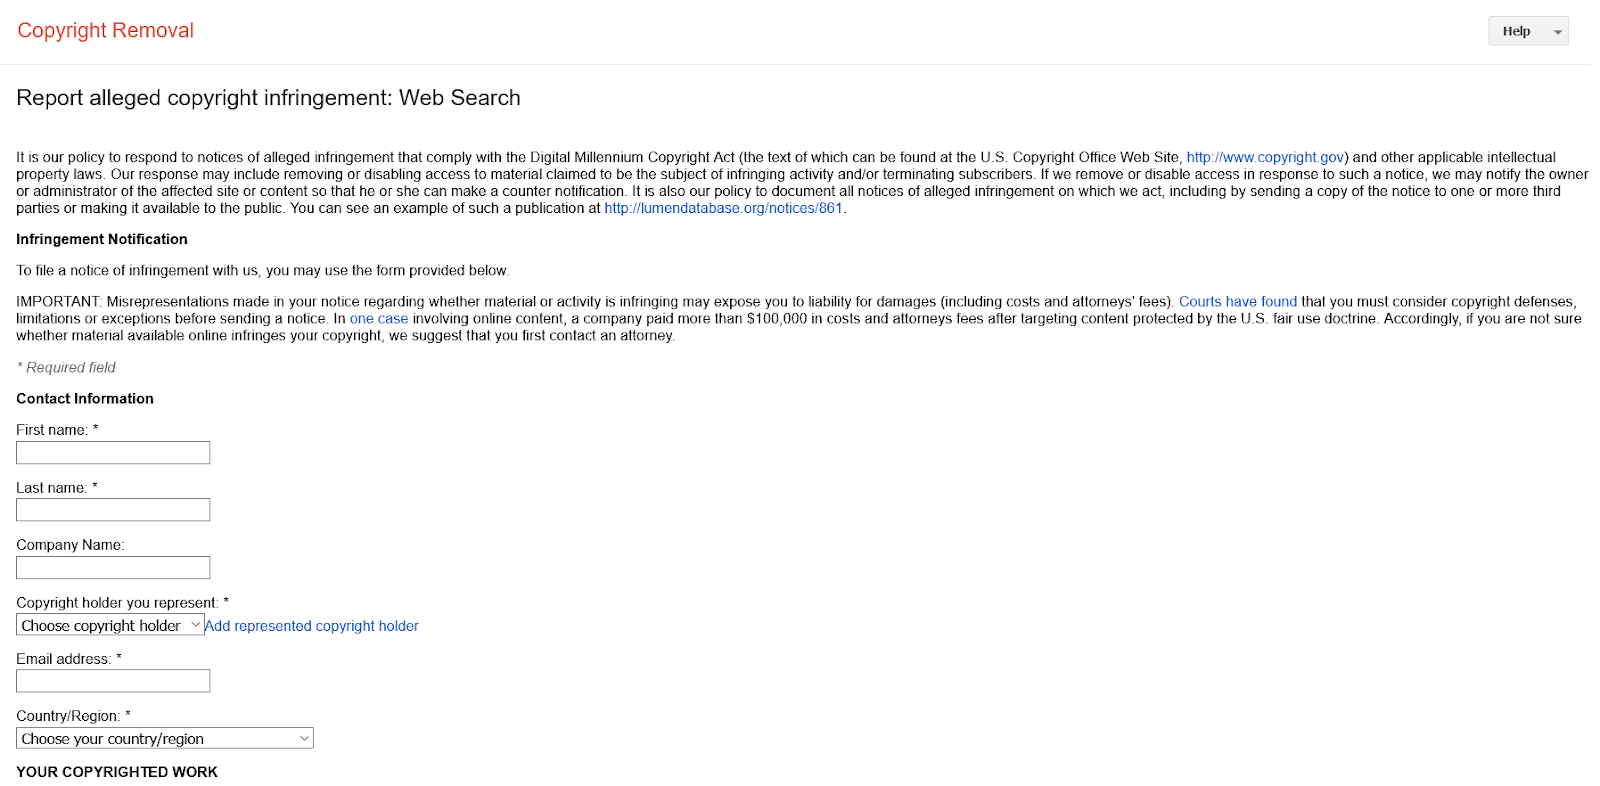 Screenshot of Google's 'Copyright Removal' request form